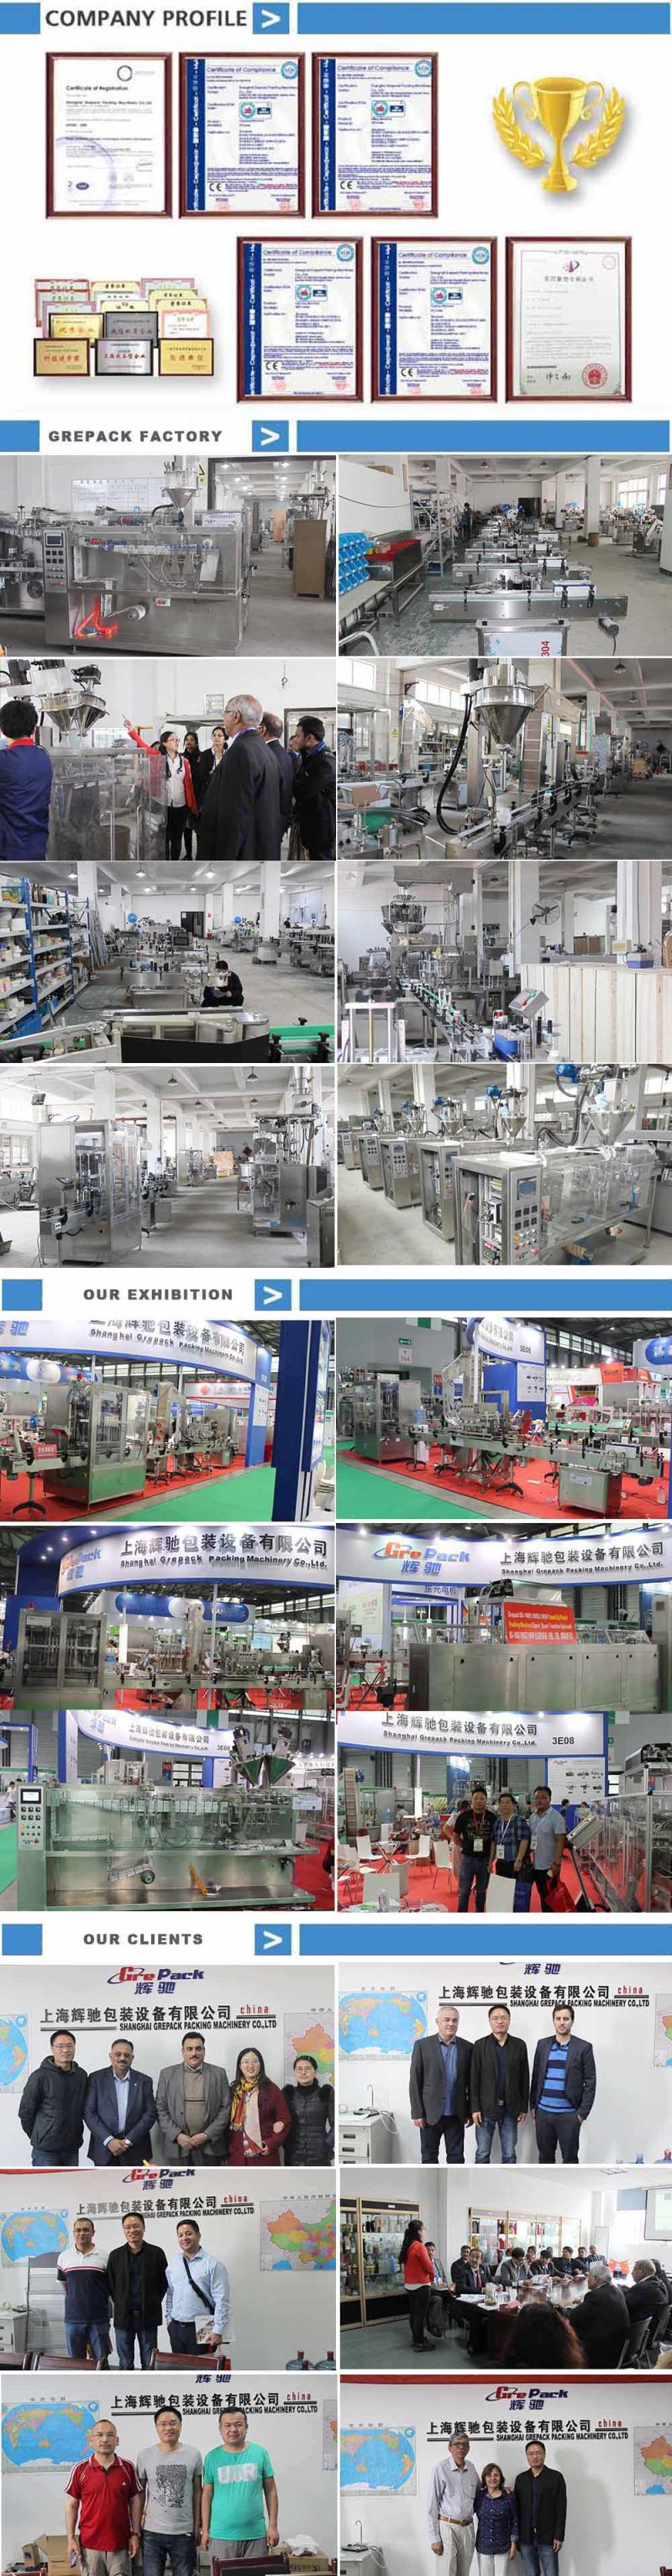 Automatic Rotary Packing Machine for Premade Pouches Doypack Machine